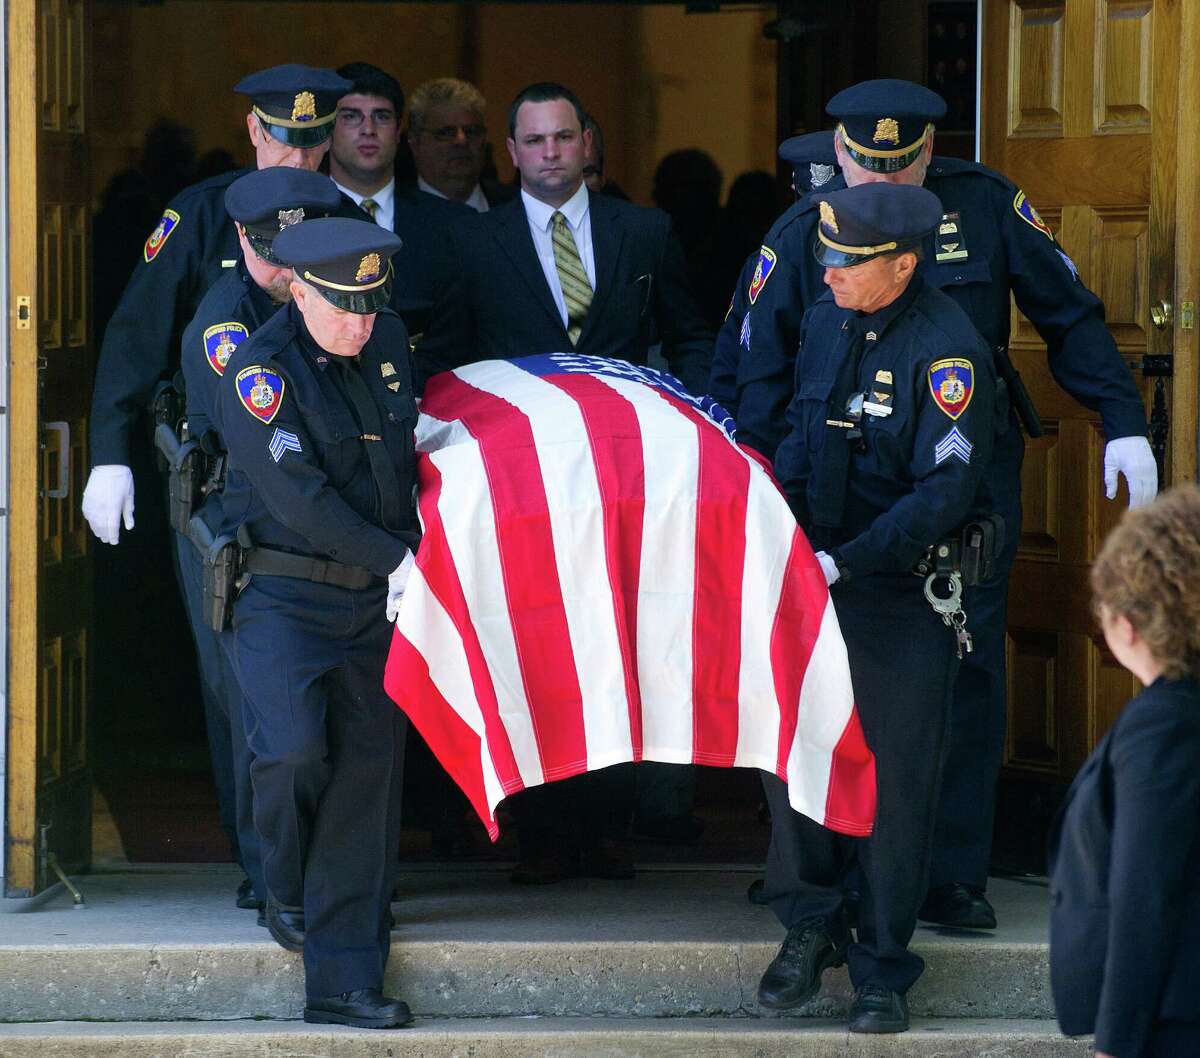 Members of the Stamford Police Department serve as pallbearers for the funeral of former Police Chief Louis DeCarlo at Sacred Heart Roman Catholic Church in Stamford, Conn., on Wednesday, June 18, 2014. Pallbearers were, clockwise from left, Sgt. Anthony Lupinacci, Officer Ed Rondano, Cpt. Gregory Tomlin, Officer Cory Casserta, Sgt. Peter di Spania, and Sgt. Paul Guzda.